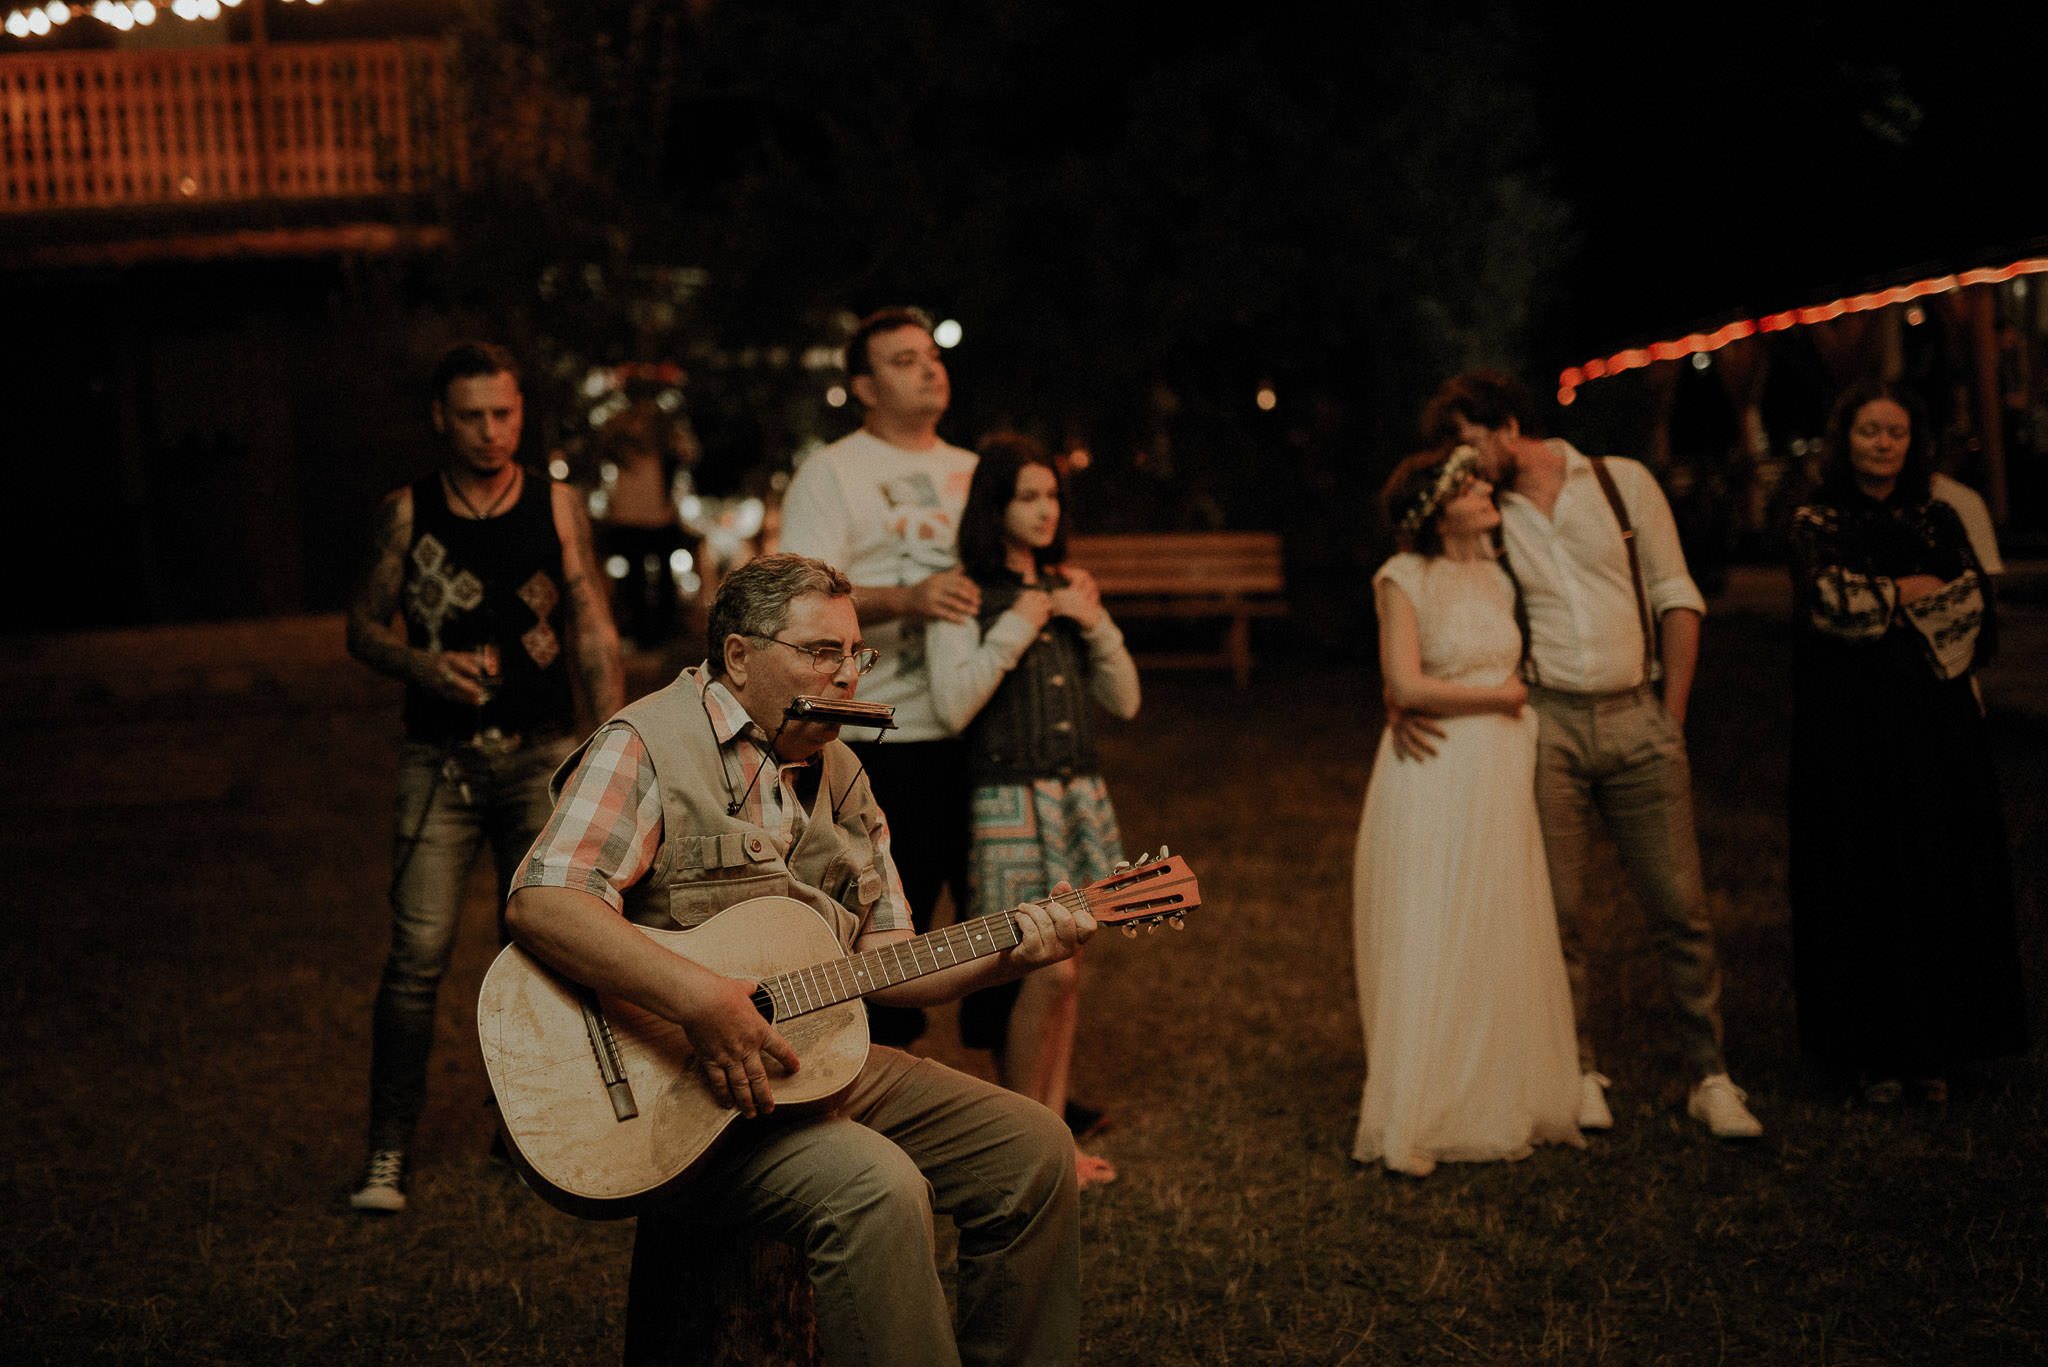 bride's father playing the guitar during wedding party at night in the forest